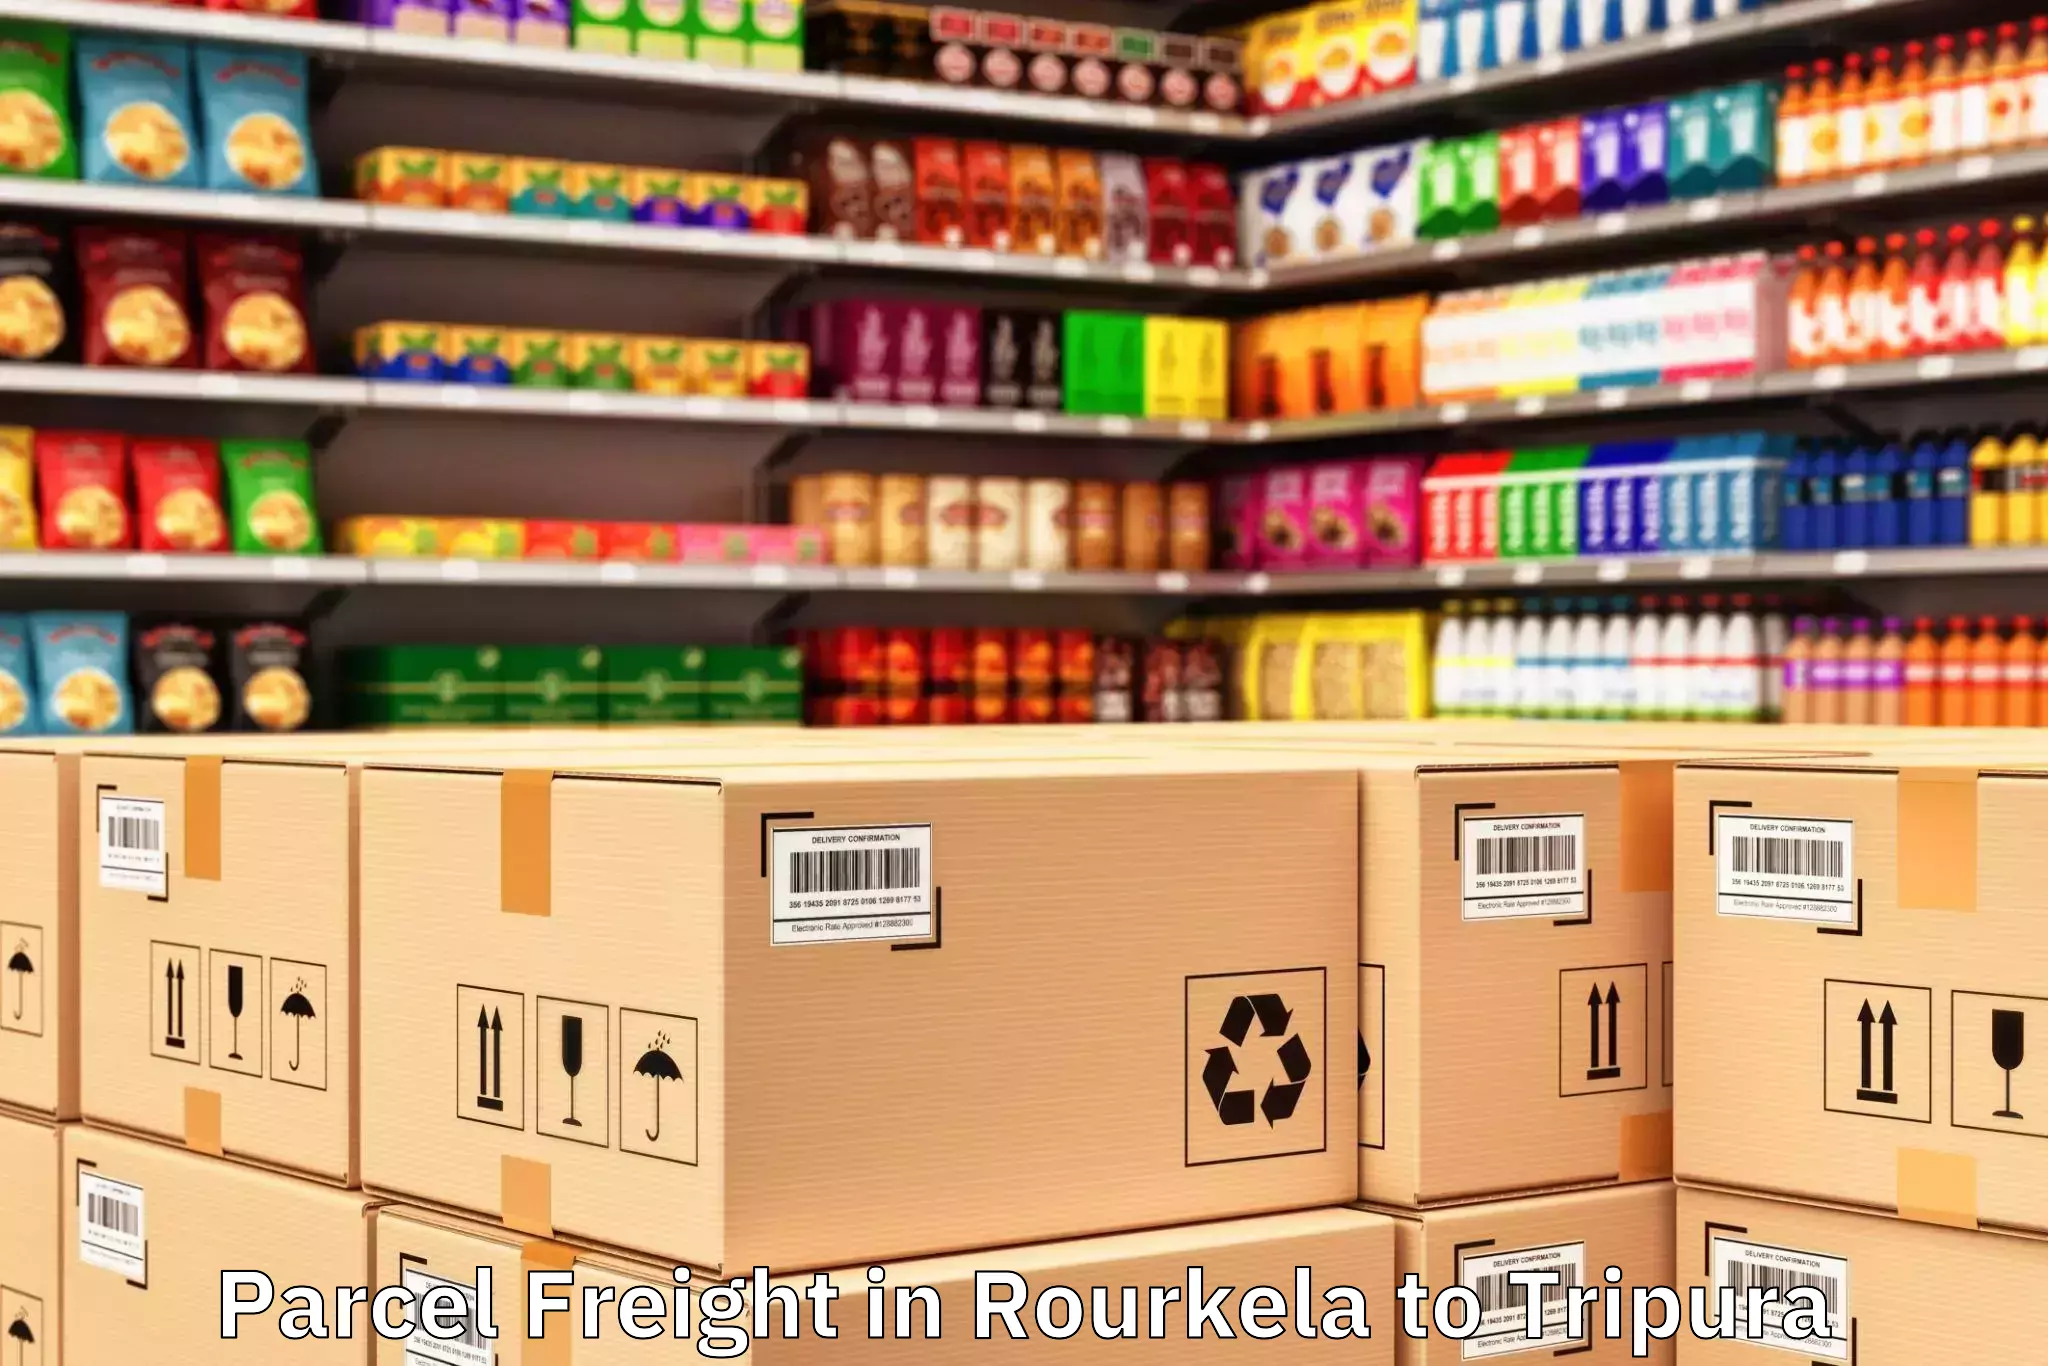 Trusted Rourkela to Tripura Parcel Freight